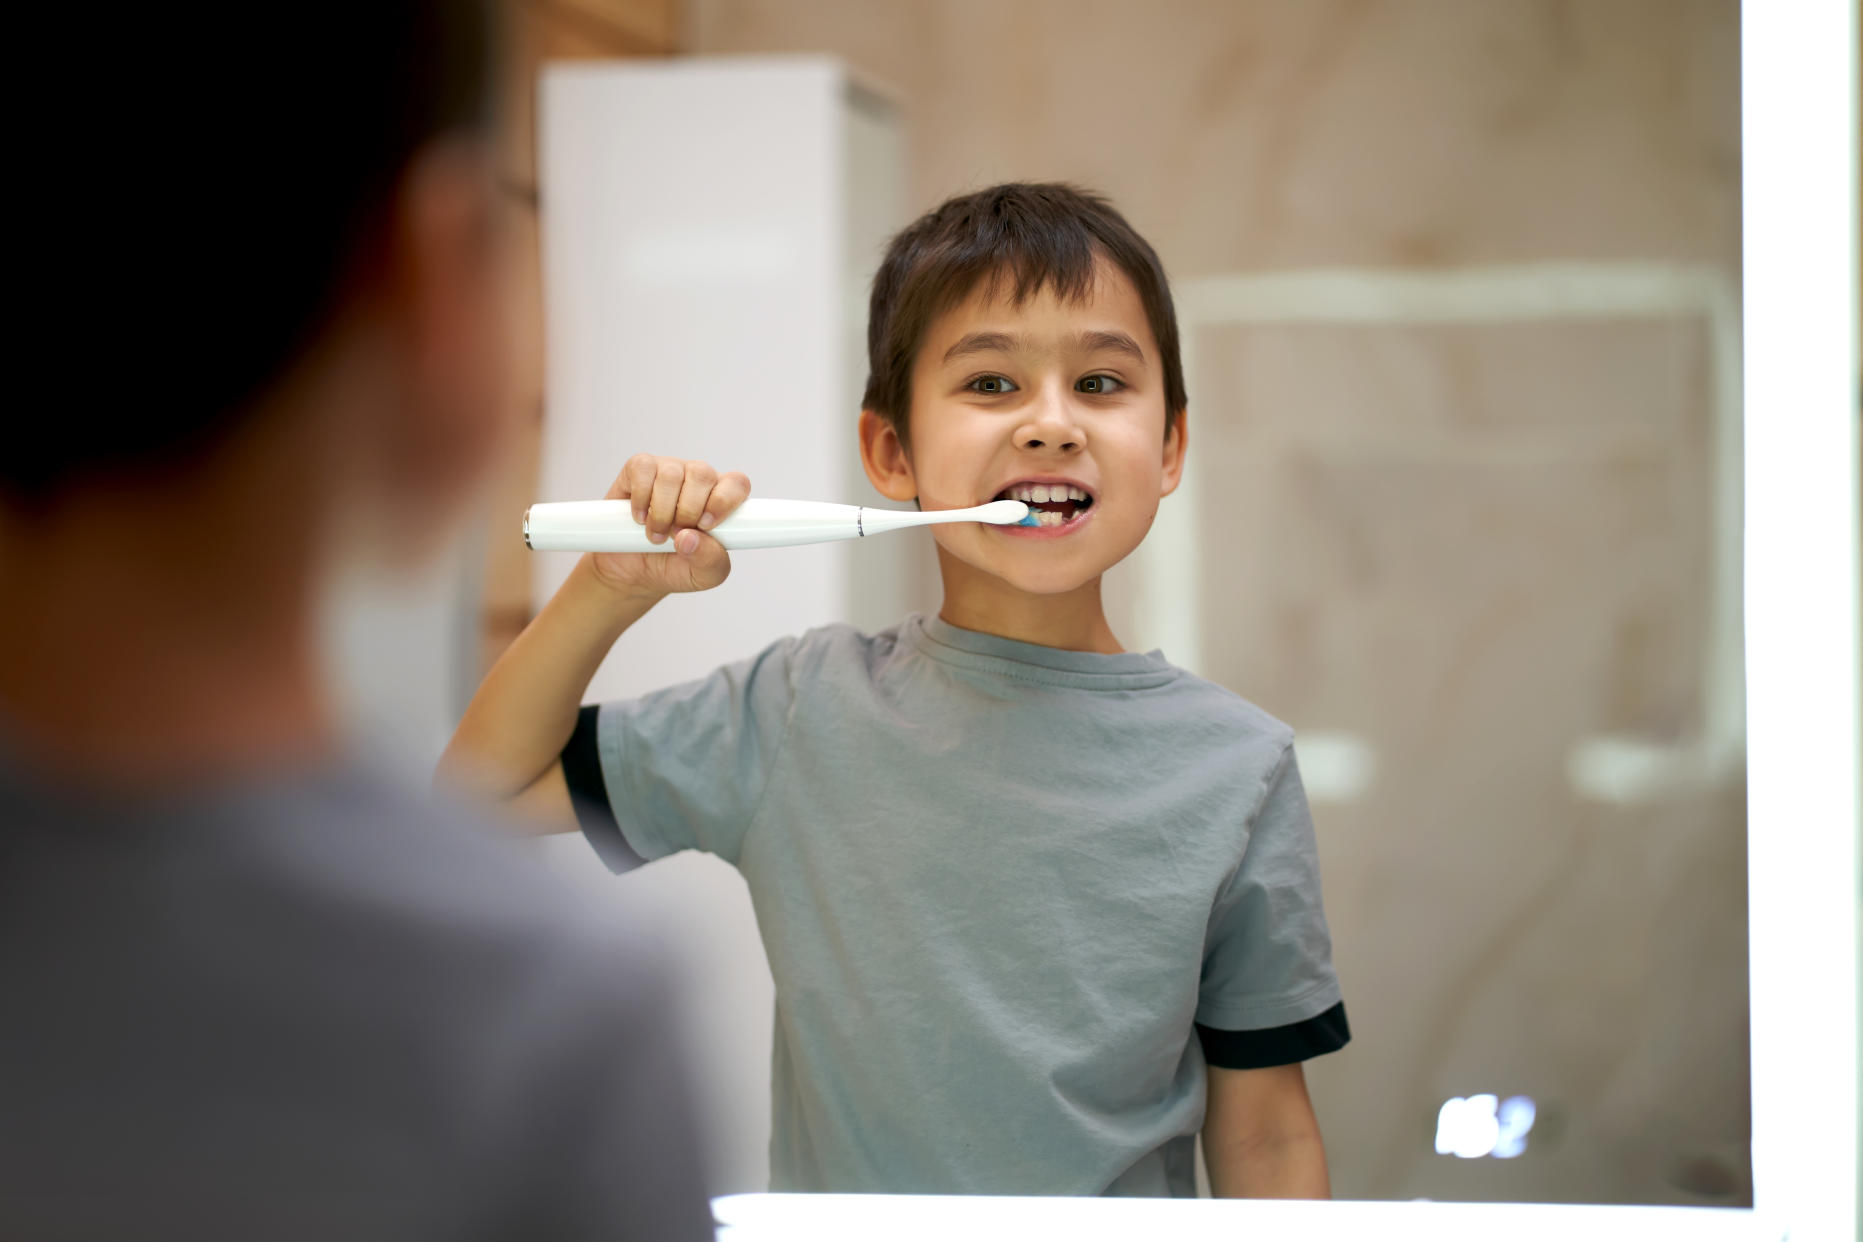 A boy brushes his teeth with an electric toothbrush near a backlit mirror.